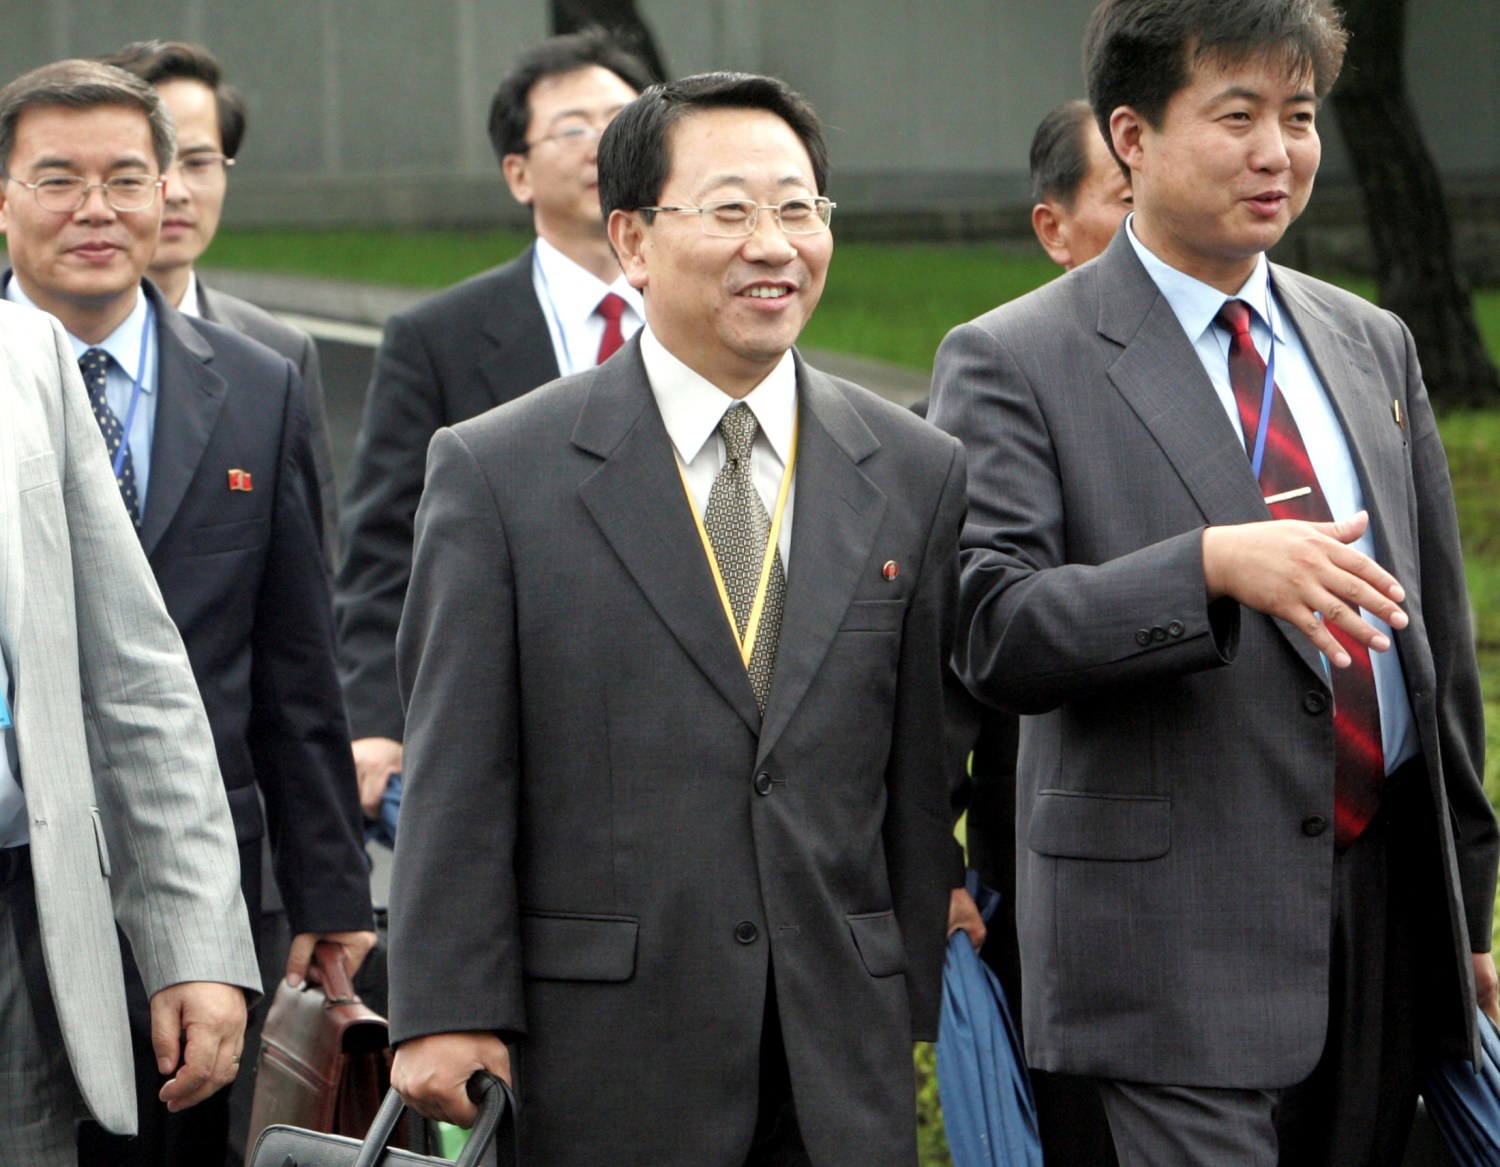 FILE PHOTO: Kim Myong Gil, minister at North Korea's mission to the United Nations, leaves bound for North Korea with other North Korean officials after the second Economy and Energy Cooperation Working Group Meeting in South Korean territory at the truce village in Panmunjom, north of Seoul August 8, 2007. Ahn Young-joon/Pool via REUTERS/File photo - RC175A8017C0